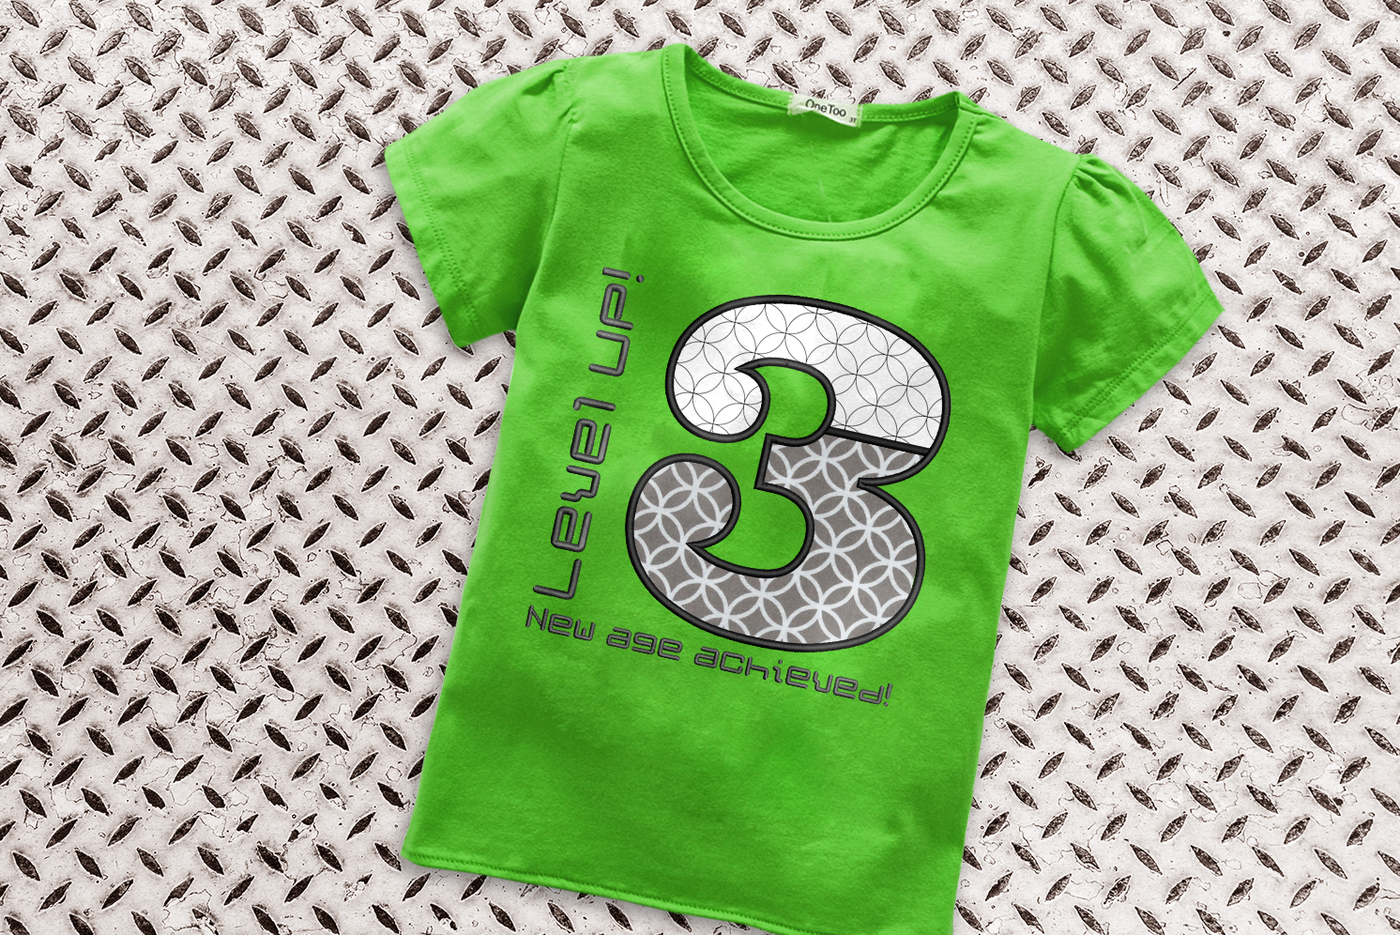 Shirt with large applique 3. Around the number is embroidered "Level UP! New age achieved!"